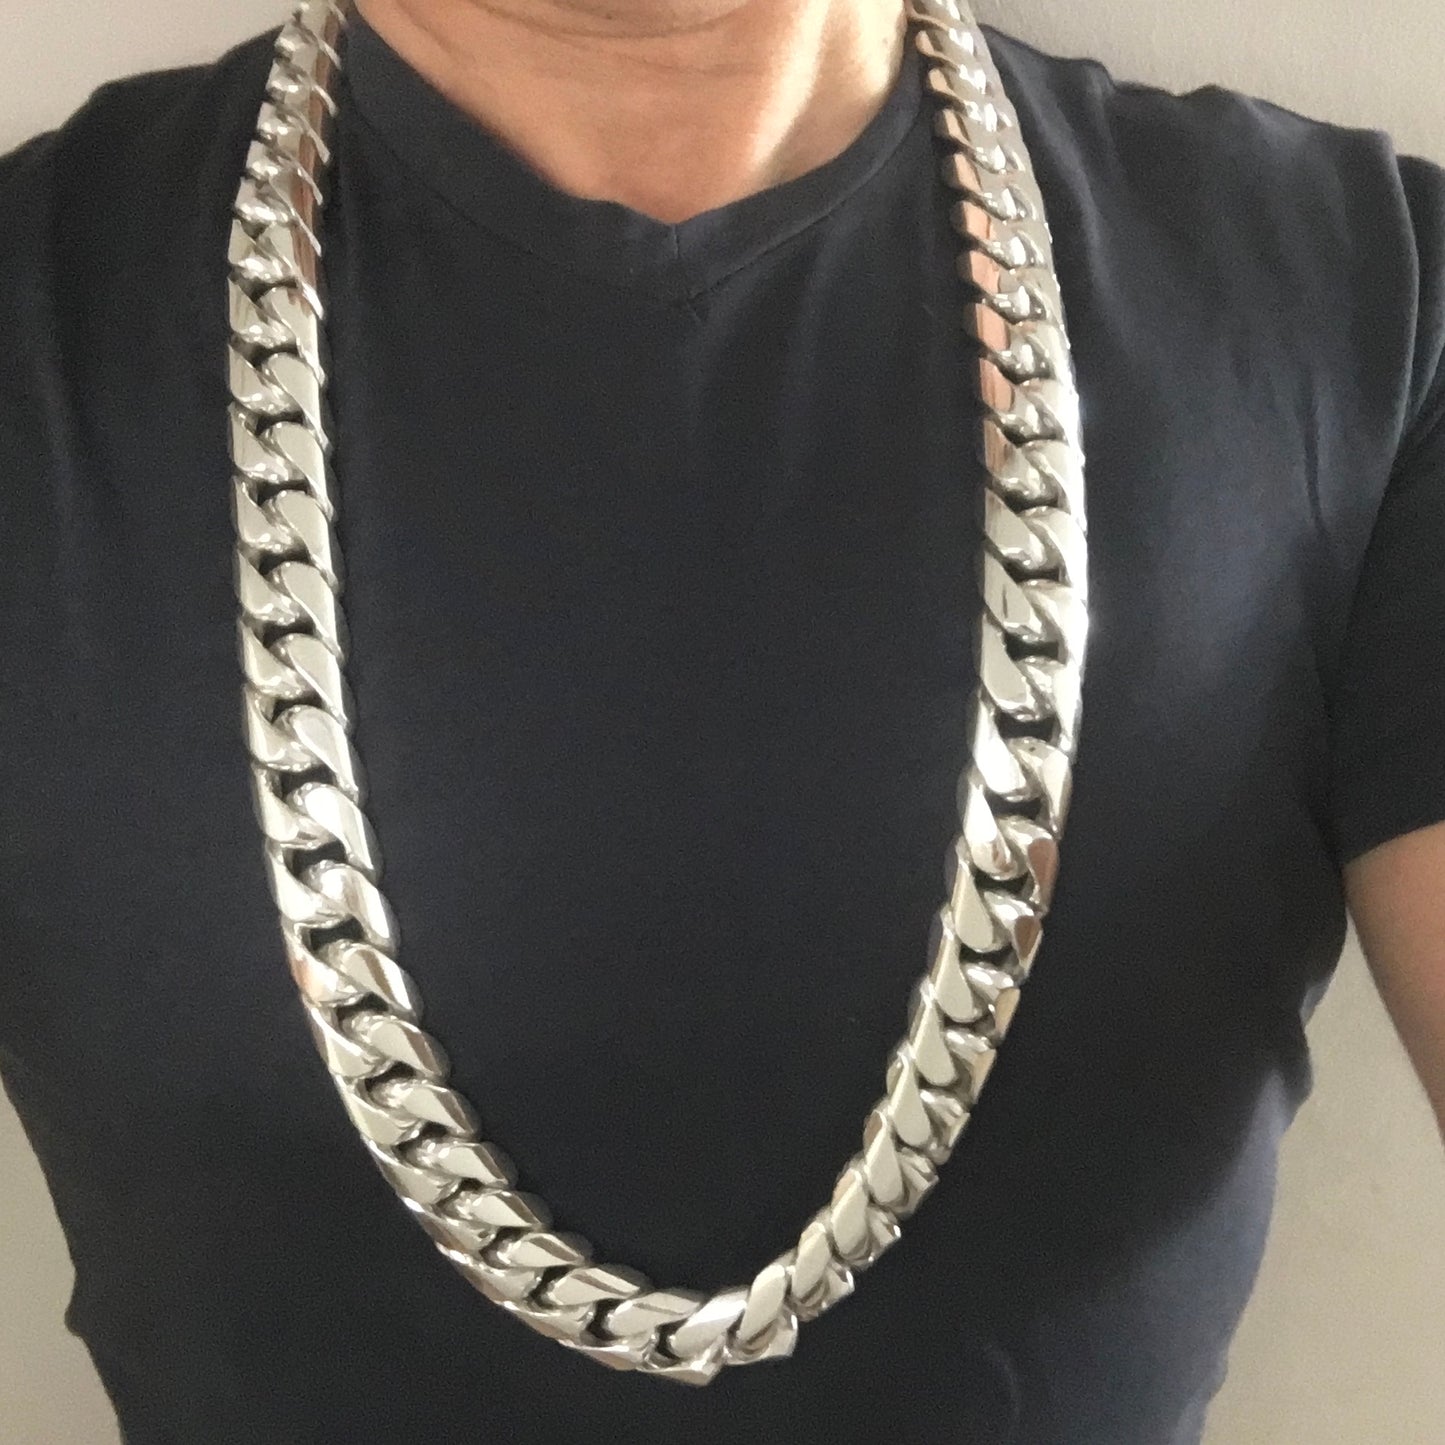 25mm Cuban Link Necklace Chain